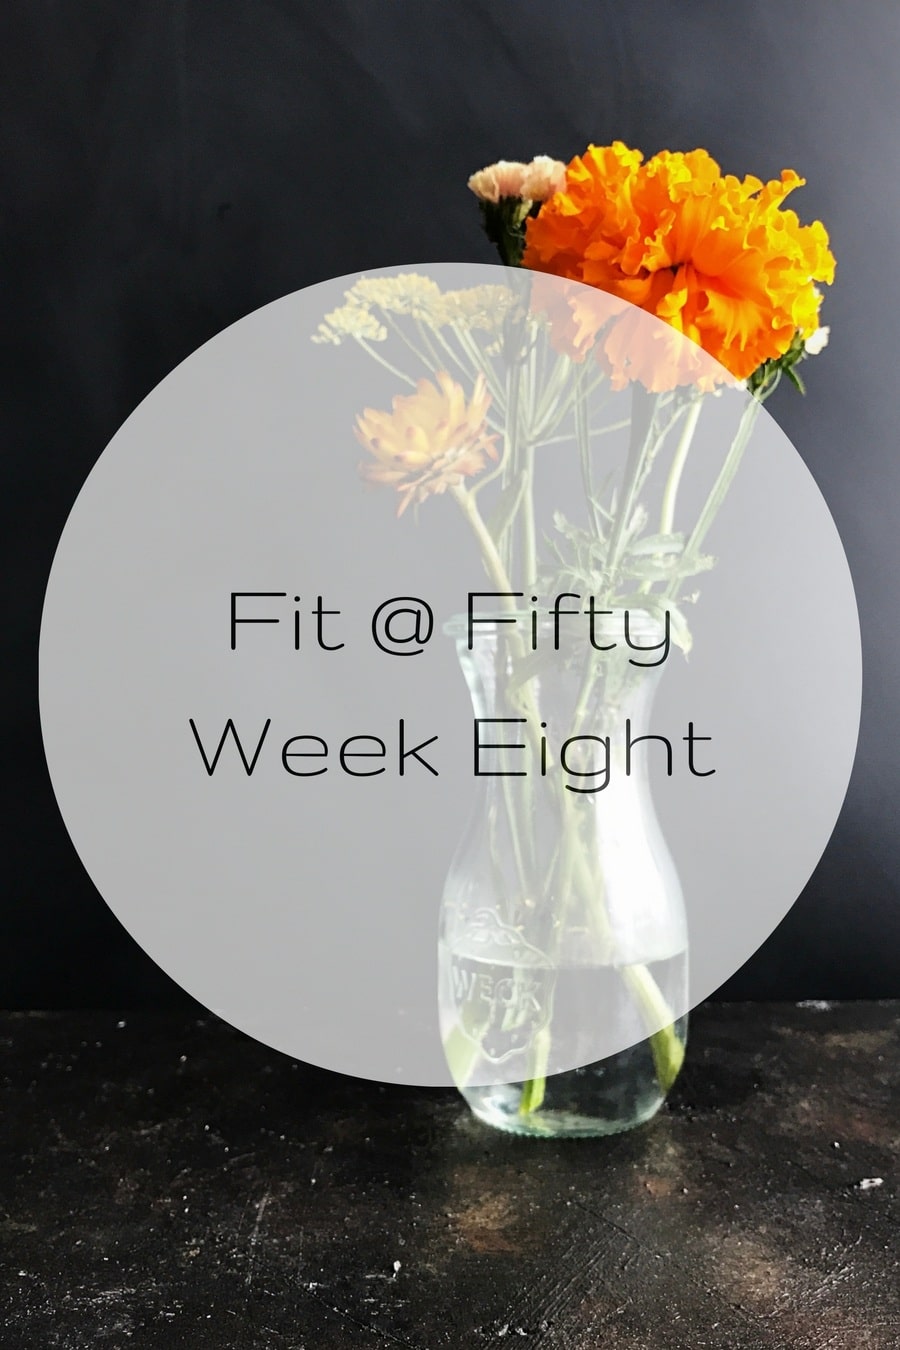 Fit at Fifty Week Eight